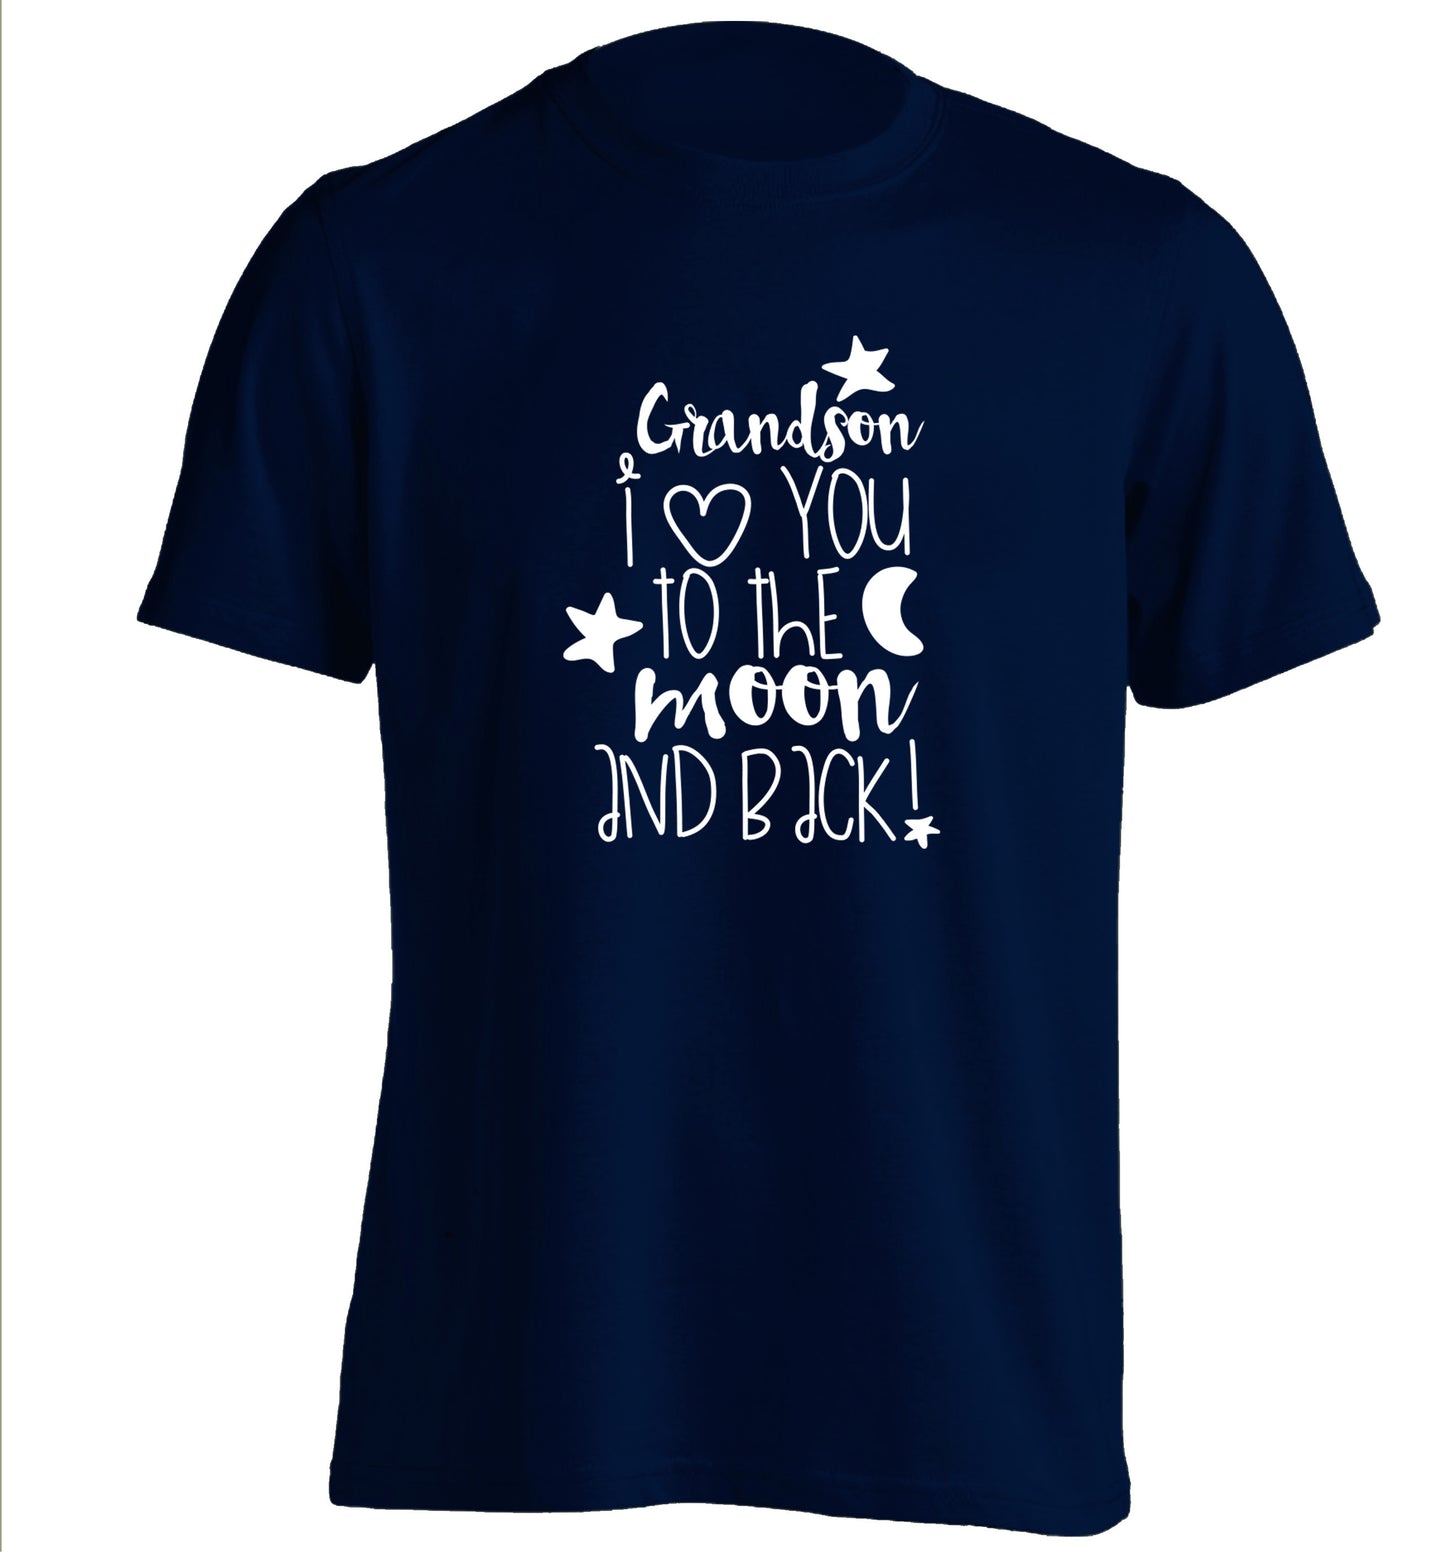 Grandson I love you to the moon and back adults unisex navy Tshirt 2XL